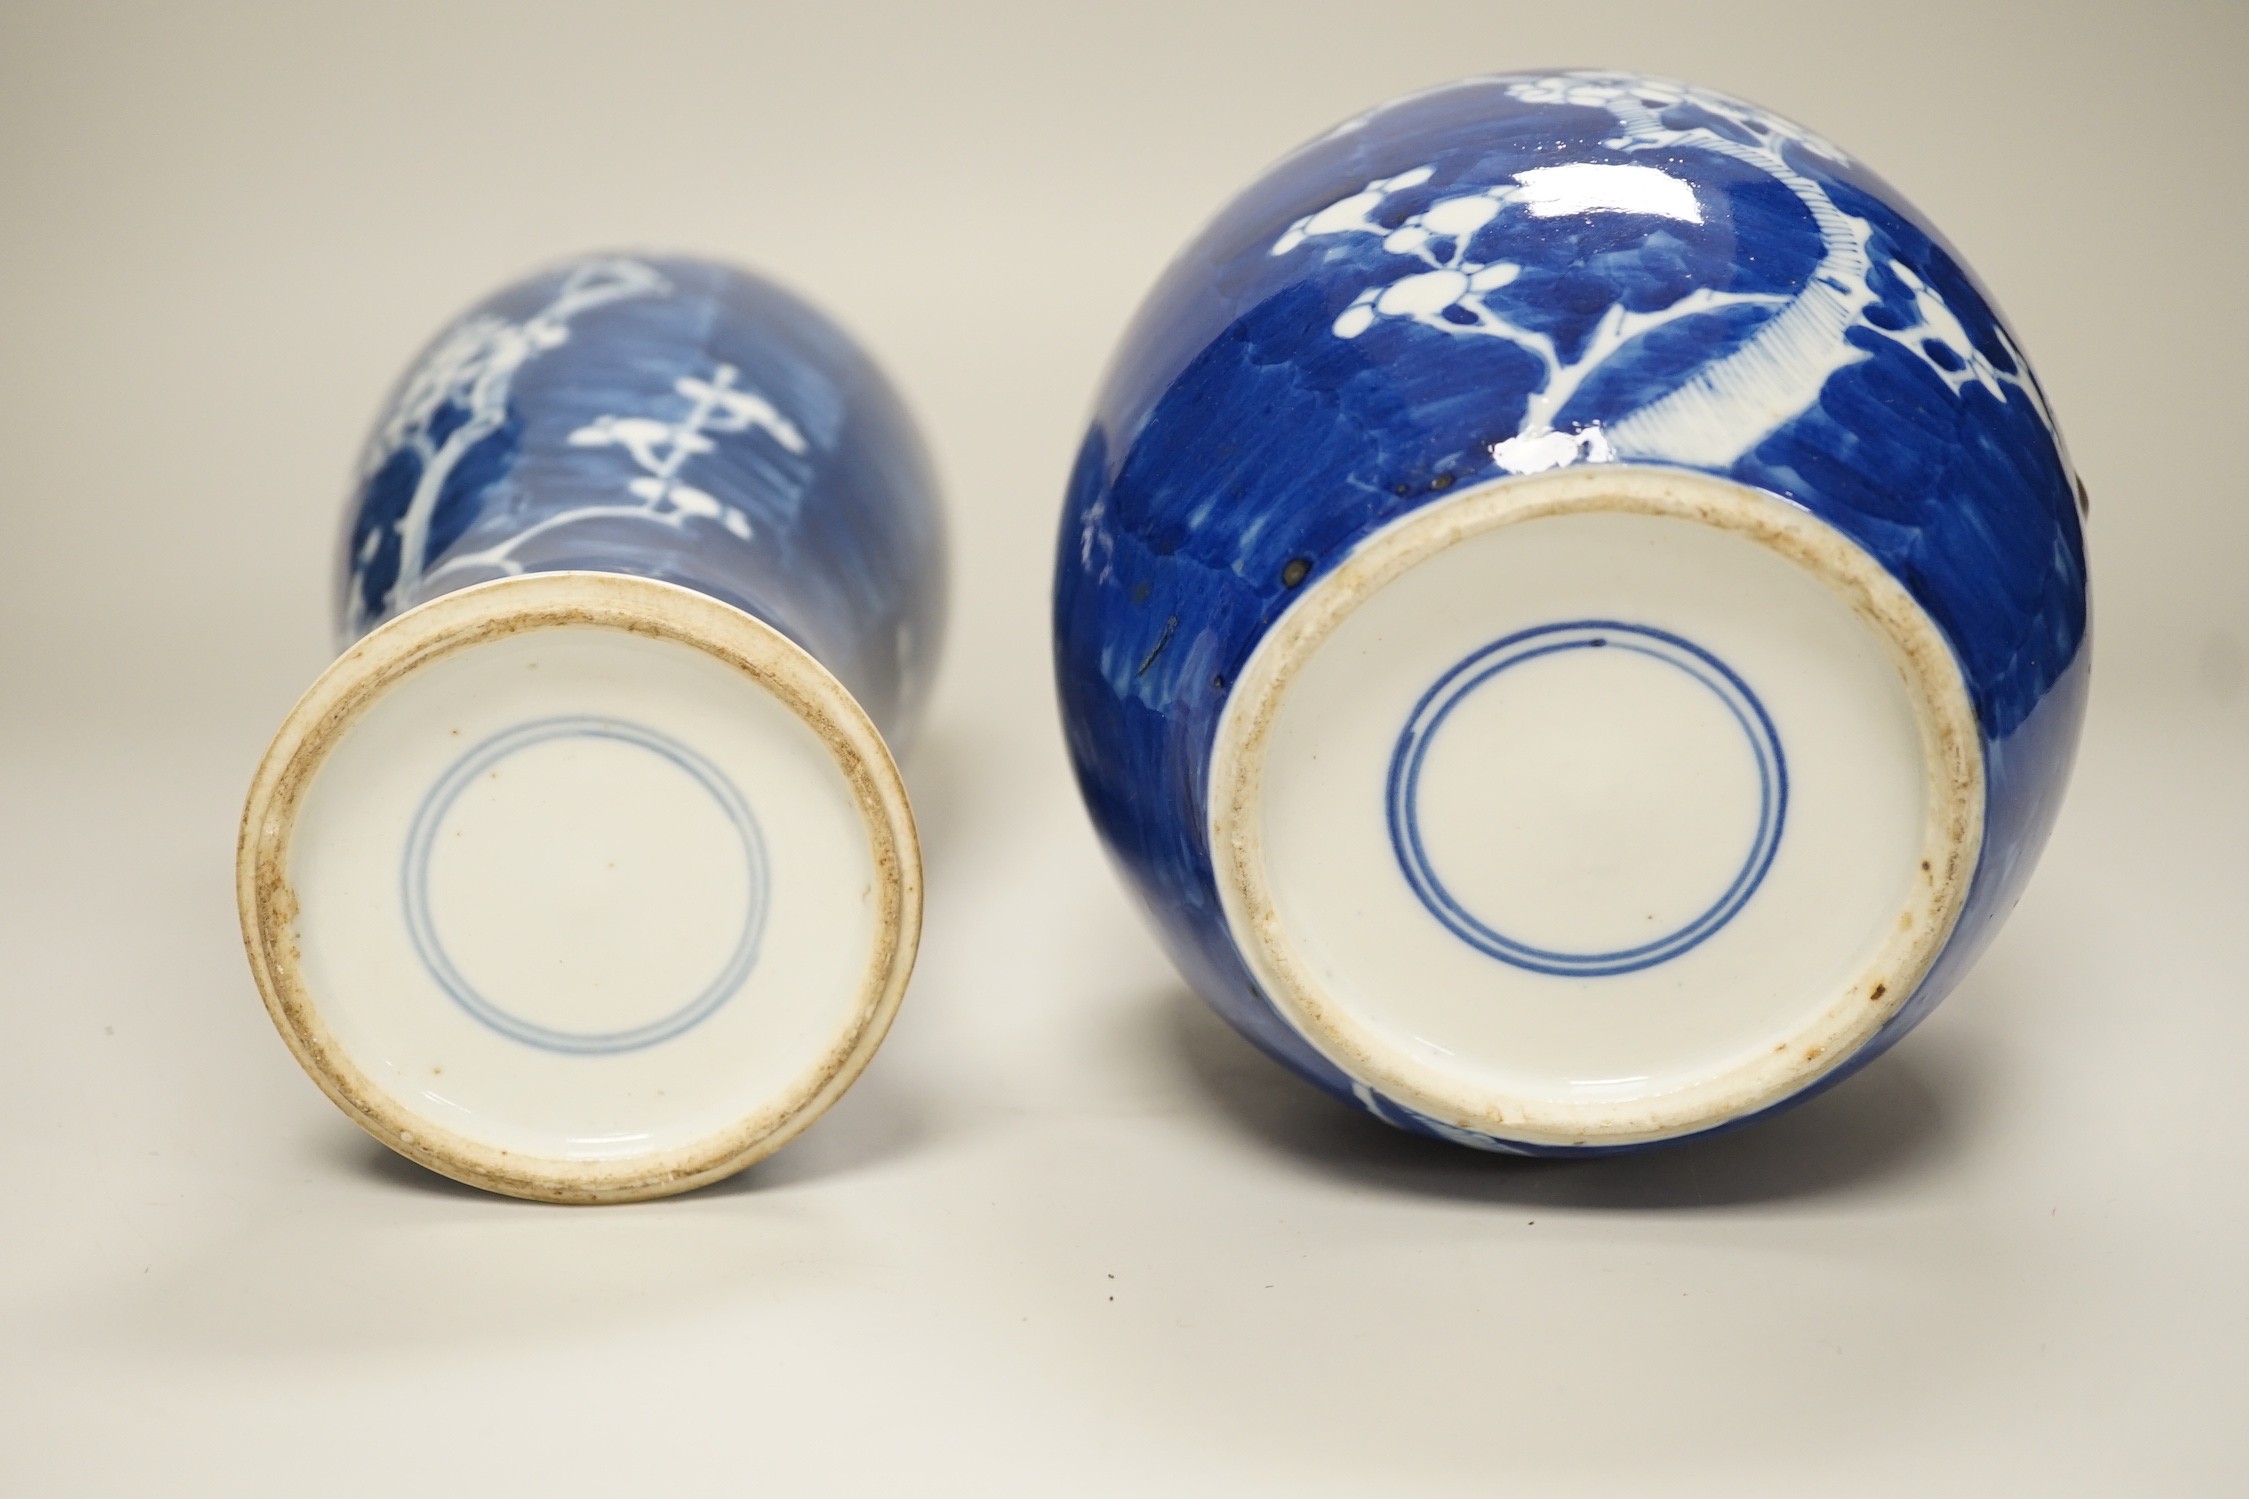 A Chinese blue and white prunus vase and a similar jar, late 19th century, vase 13.5cms high - Image 4 of 4